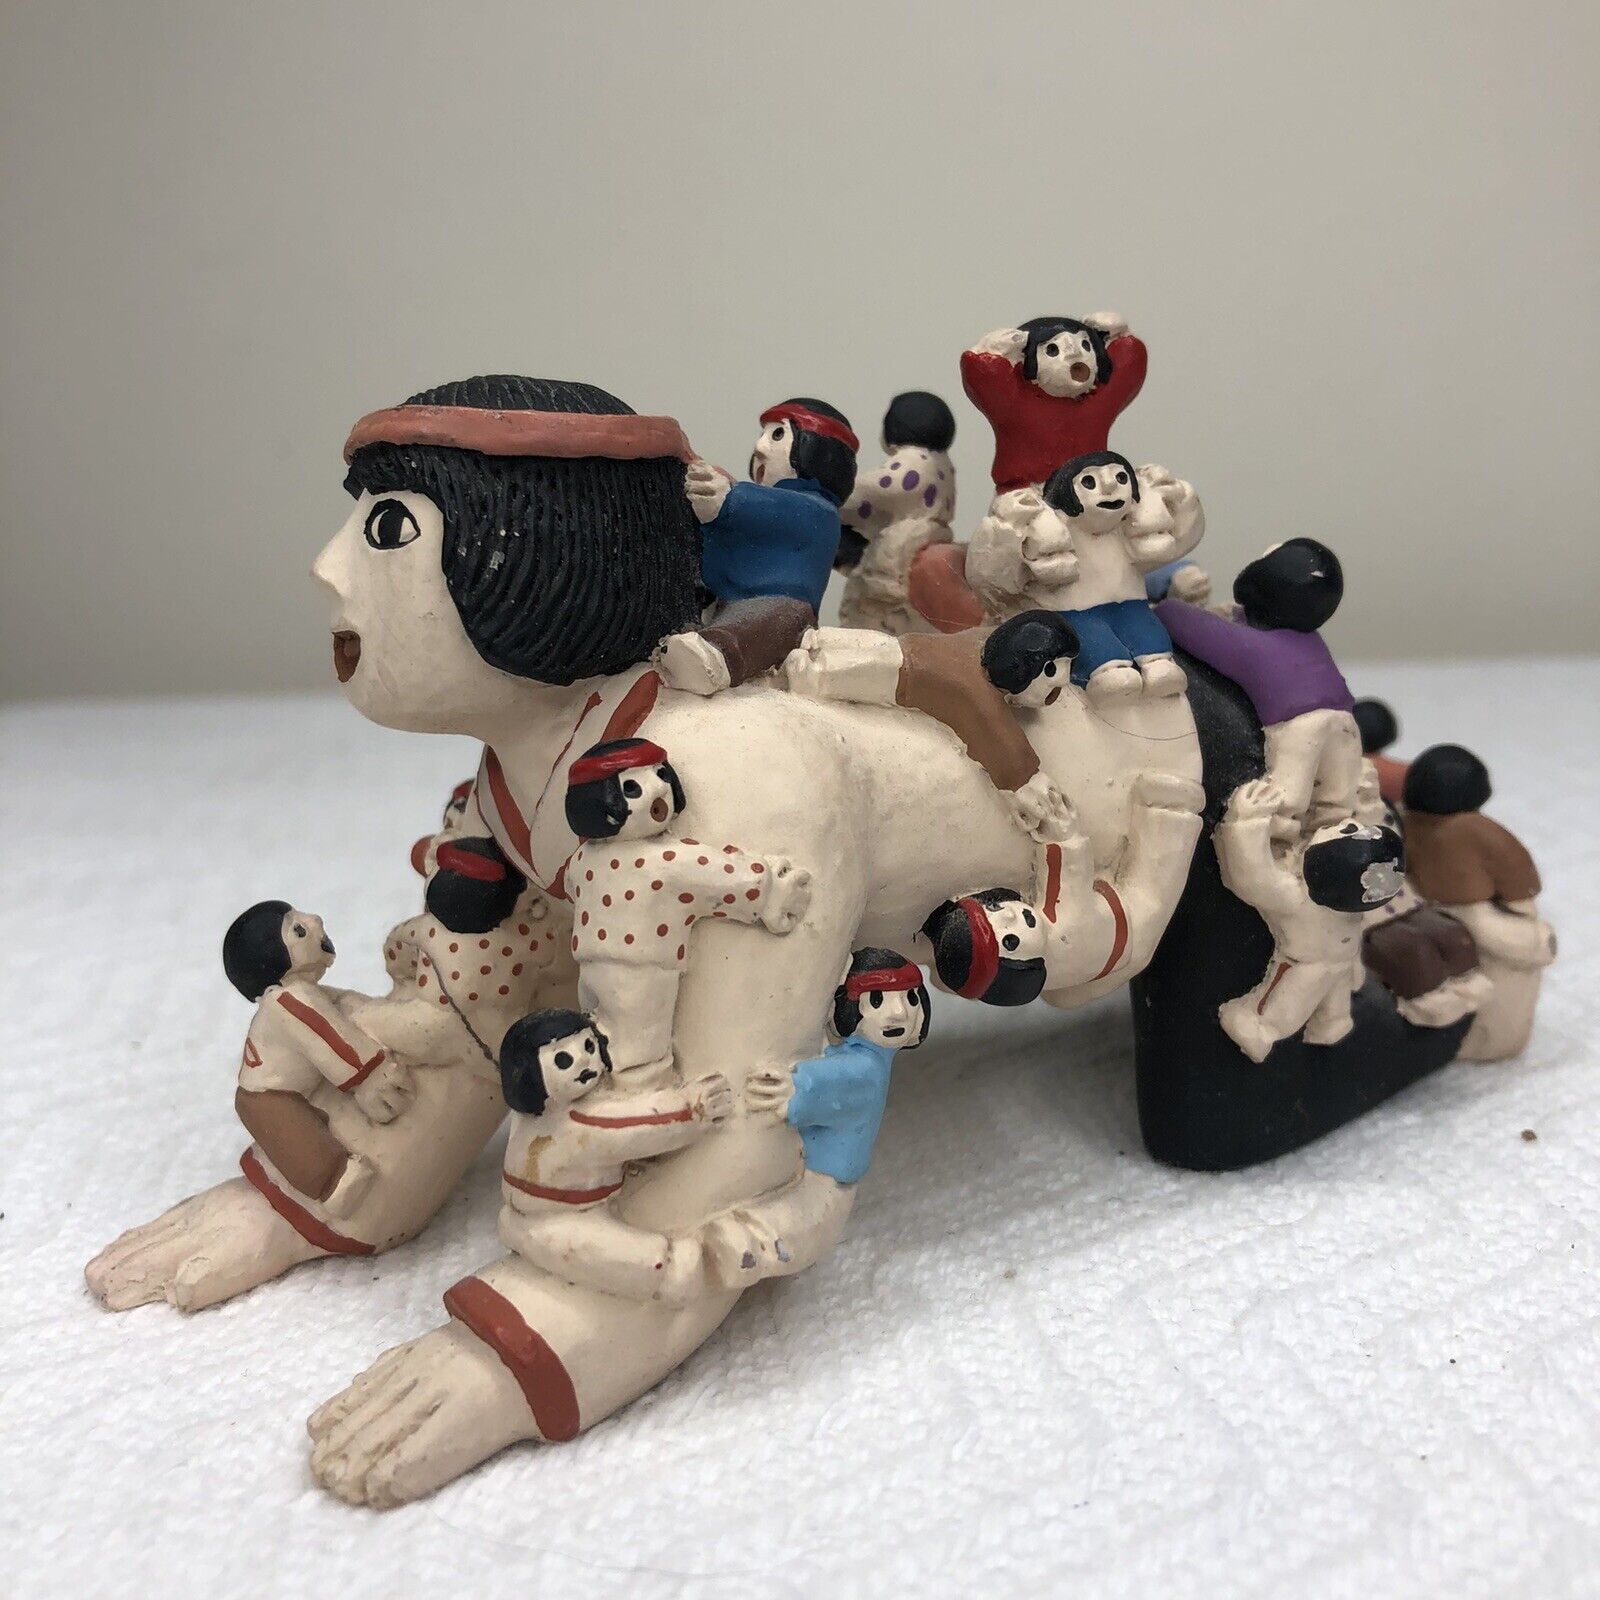 Vintage Native American Pottery Crawling Storyteller Figure With 25 Children